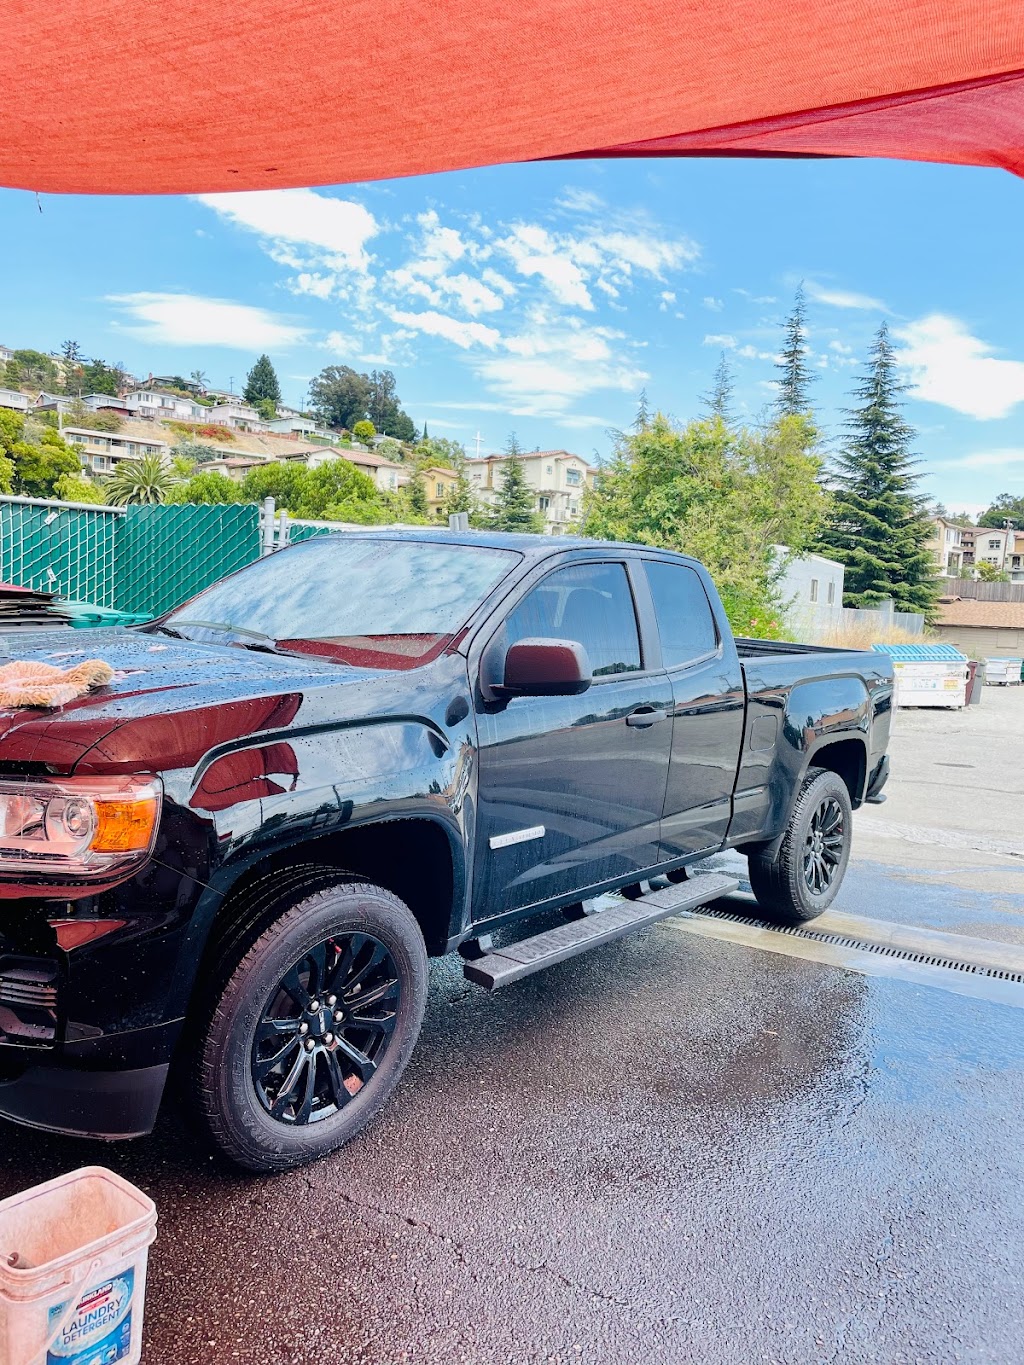 Foothill 100% Hand Car Wash | 16210 Foothill Blvd, San Leandro, CA 94578 | Phone: (510) 276-7981